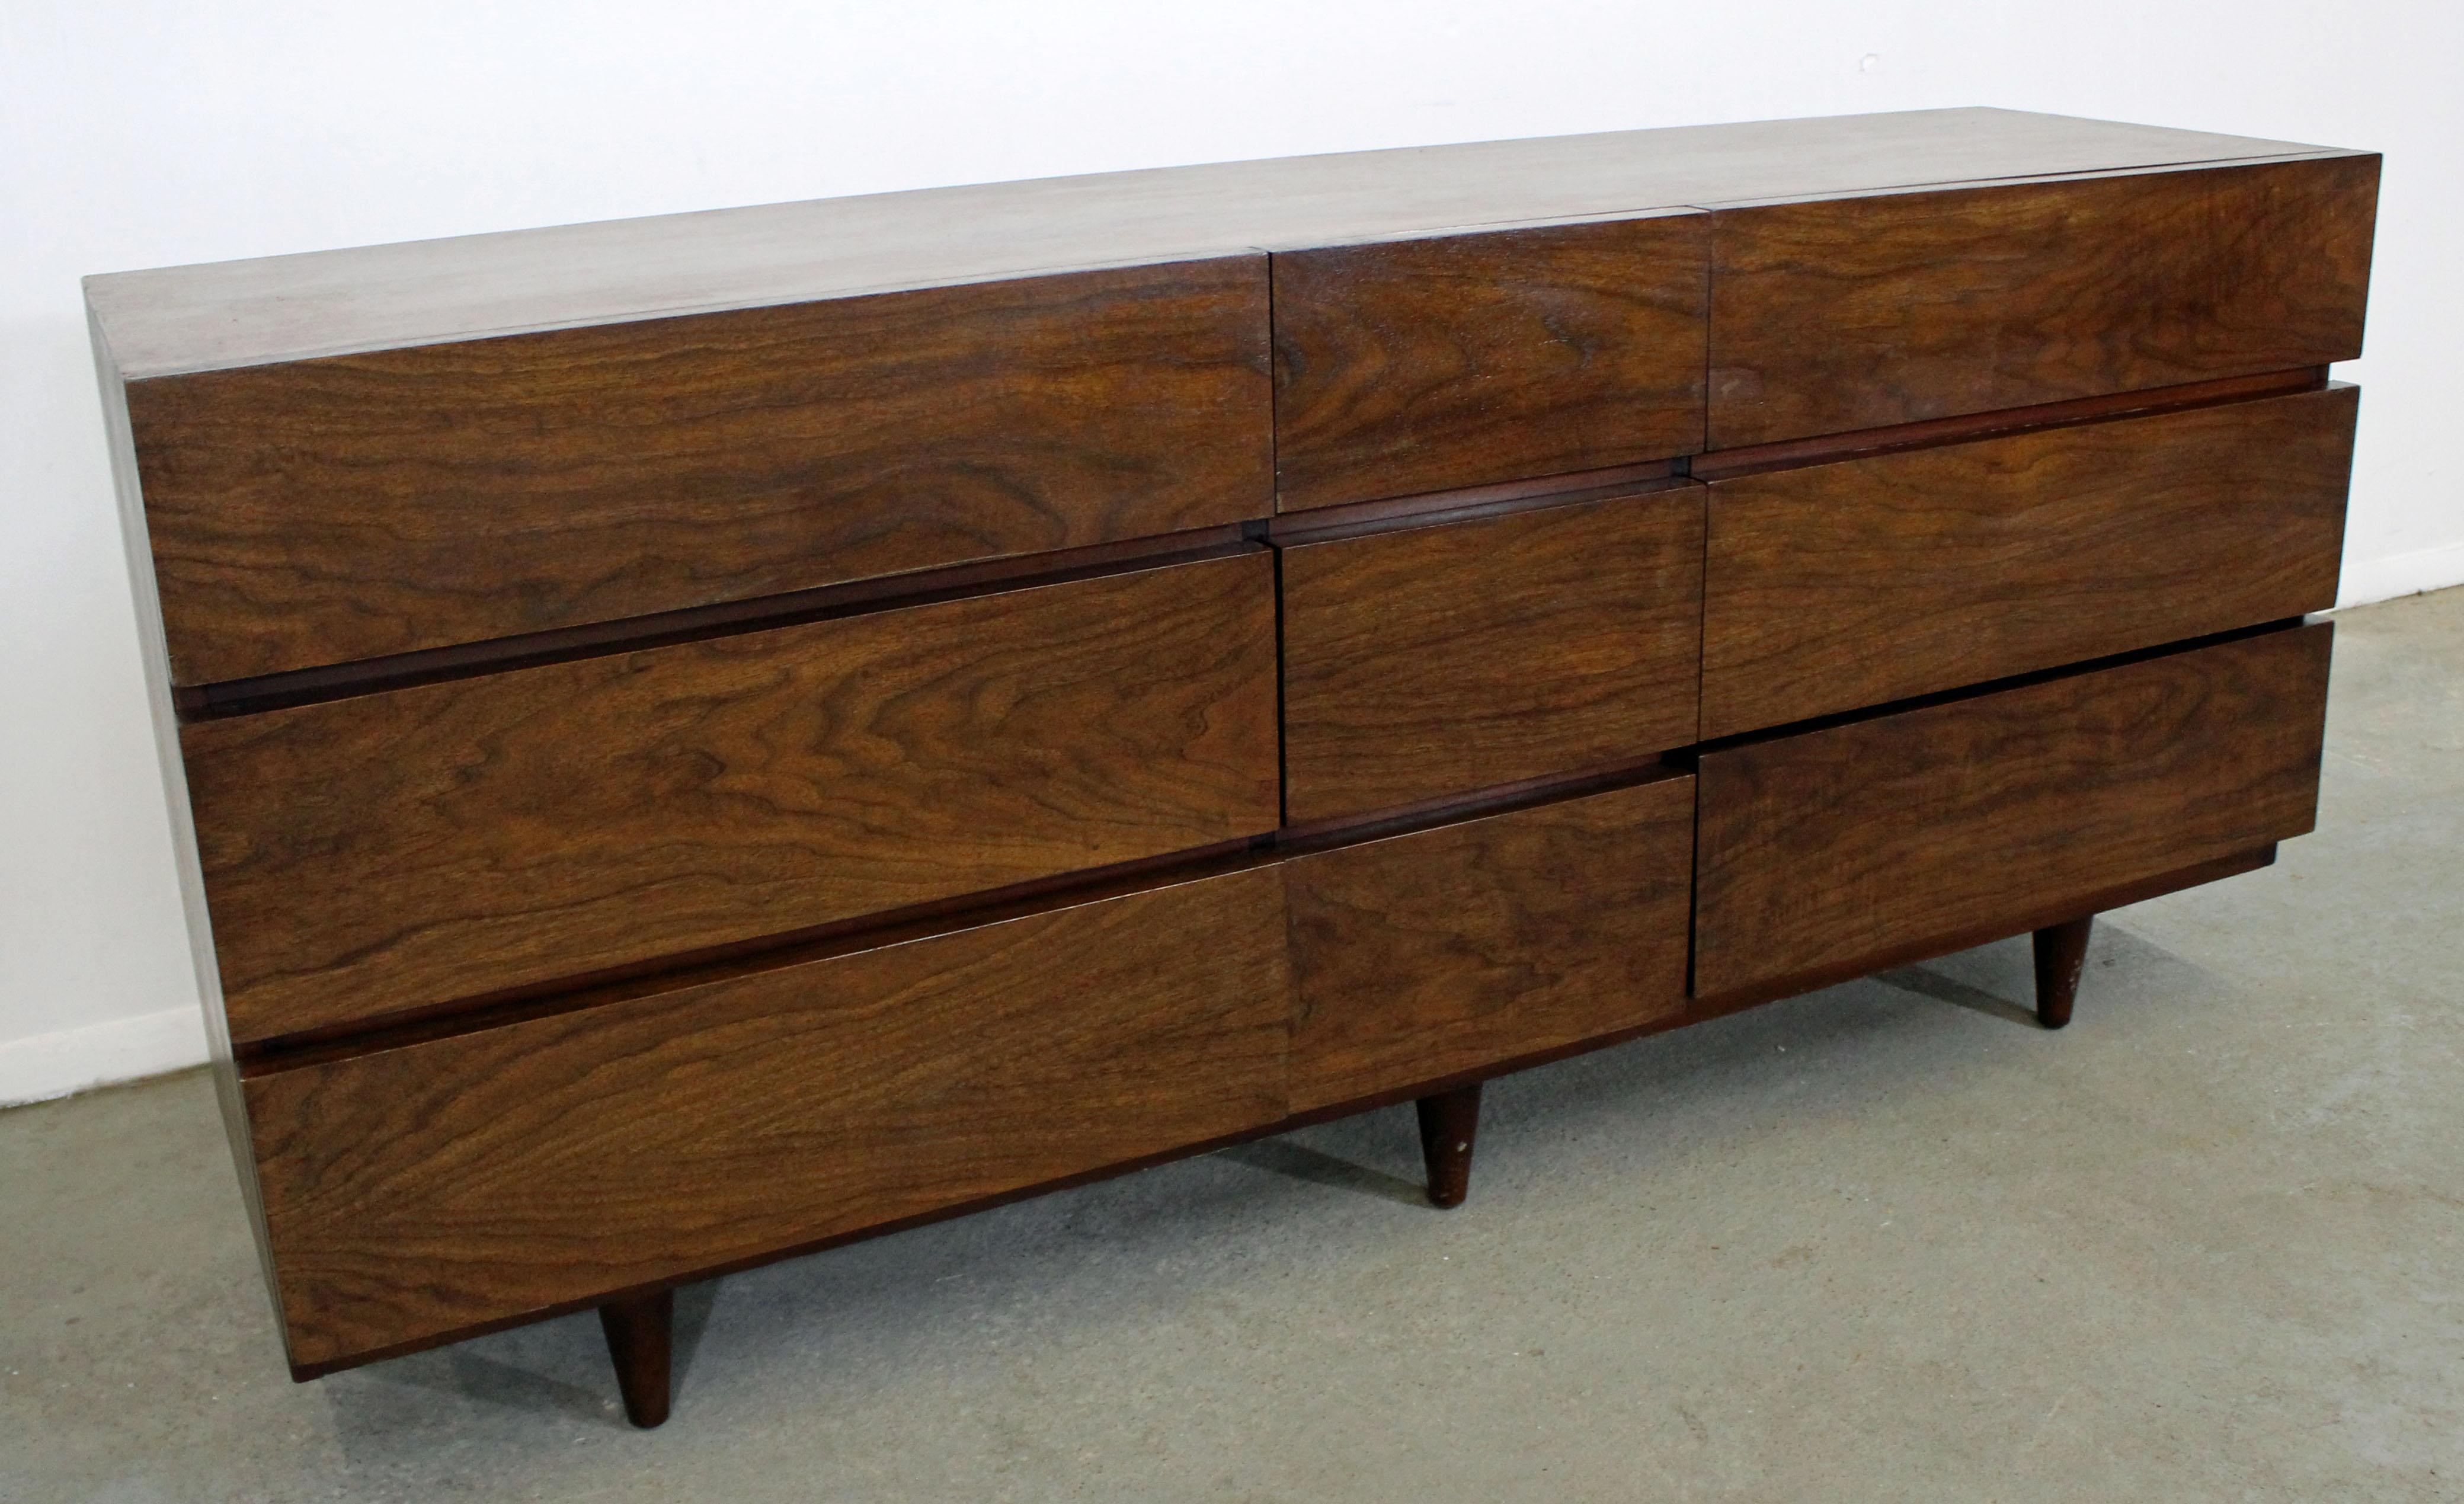 Offered is a Mid-Century Modern walnut credenza/dresser, made by American of Martinsville. It is made of walnut with nine drawers. It is in excellent condition for its age, shows minor signs of wear (has been refinished, slight surface